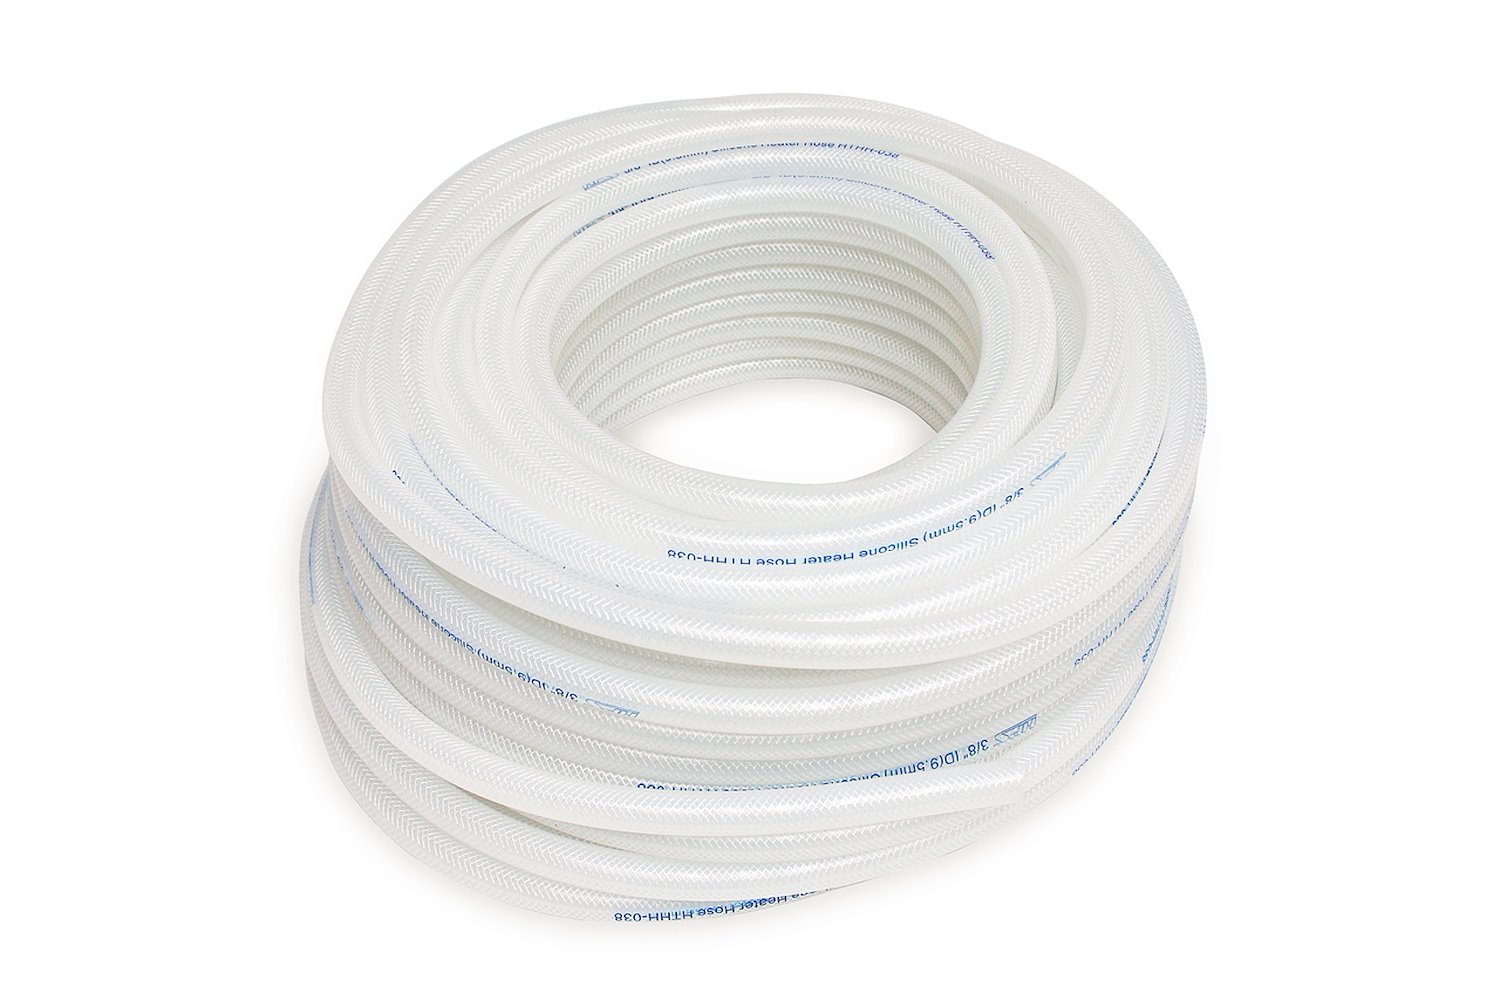 HTHH-032-CLEARx50 Silicone Heater Hose Tubing, High-Temp Reinforced, 5/16 in. ID, 50 ft. Roll, Clear